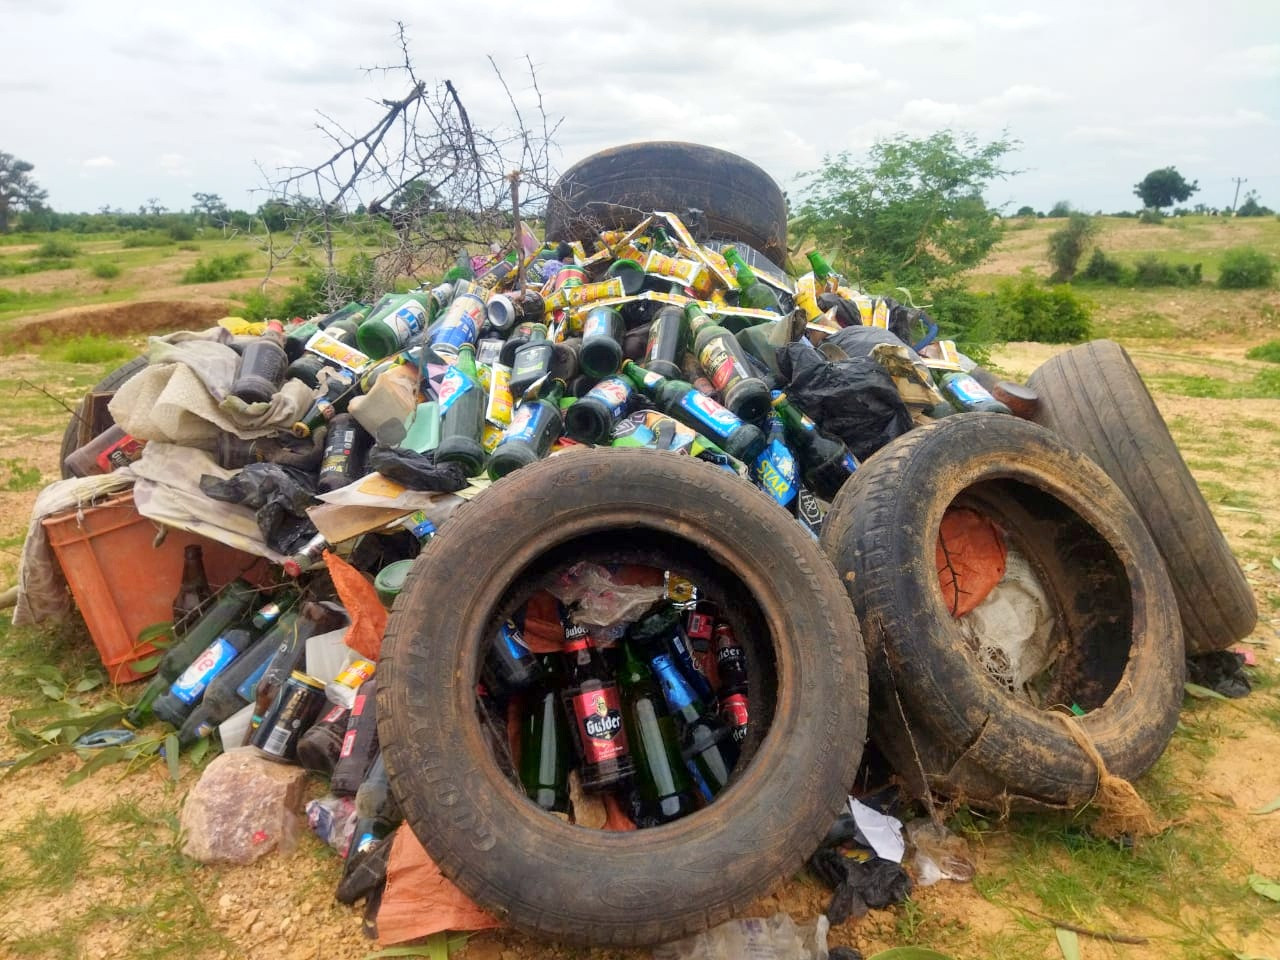 Hisbah burns 5,550 bottles of alcohol worth N3.2m in Jigawa